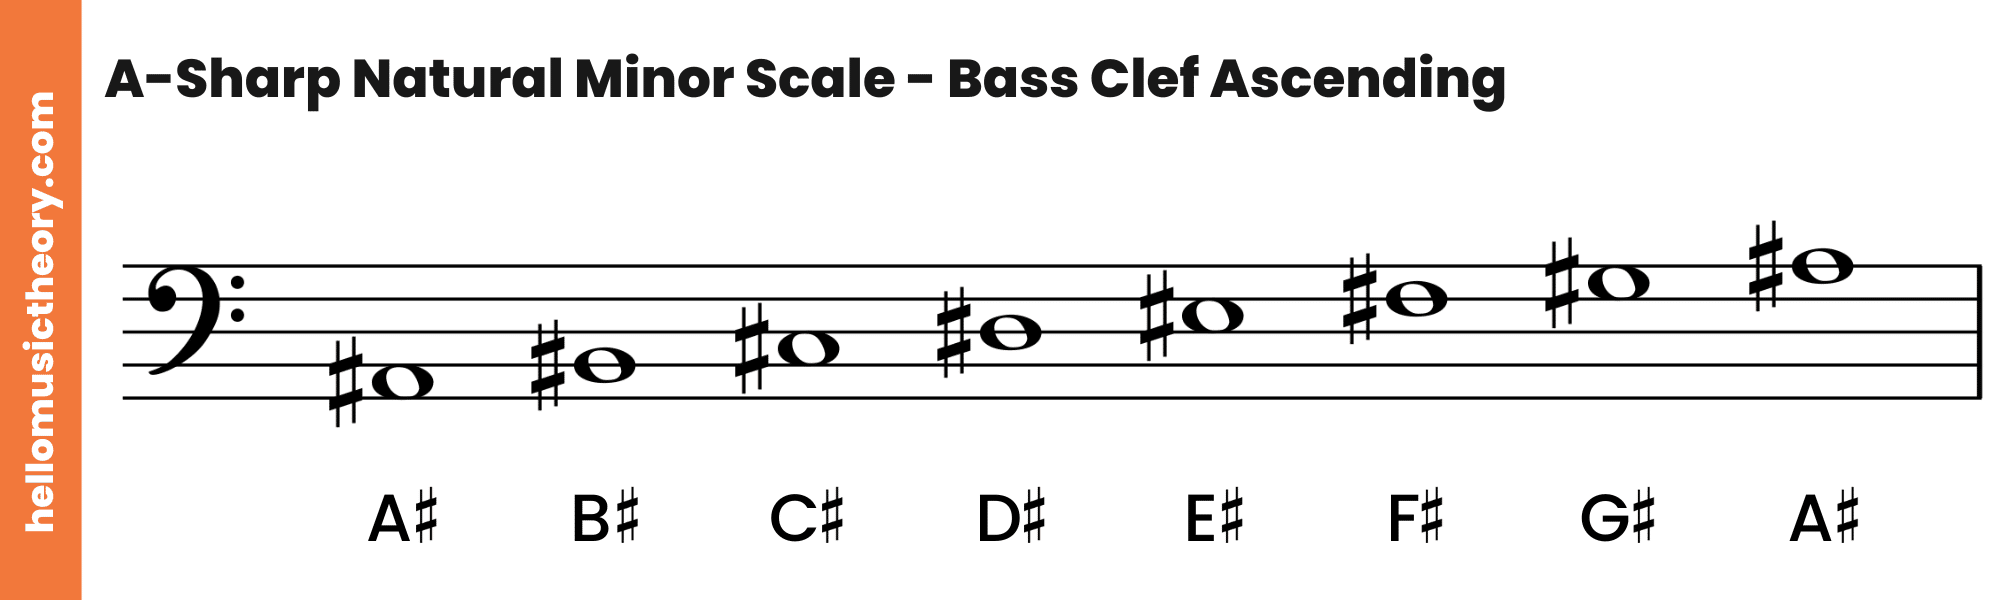 A-Sharp Natural Minor Scale Bass Clef Ascending